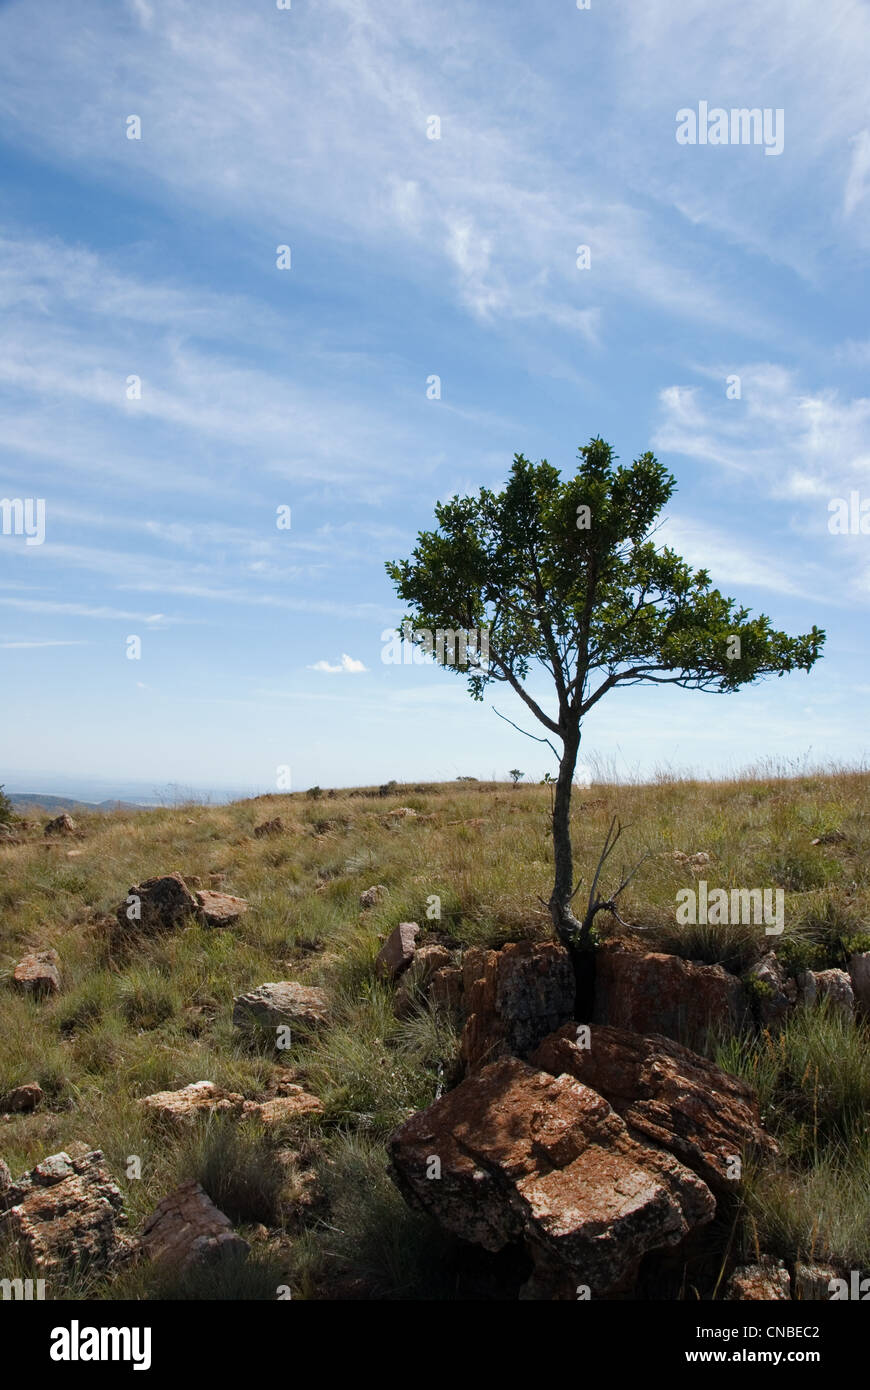 One small tree on the side of a mountain with blue skies in South Africa. Stock Photo